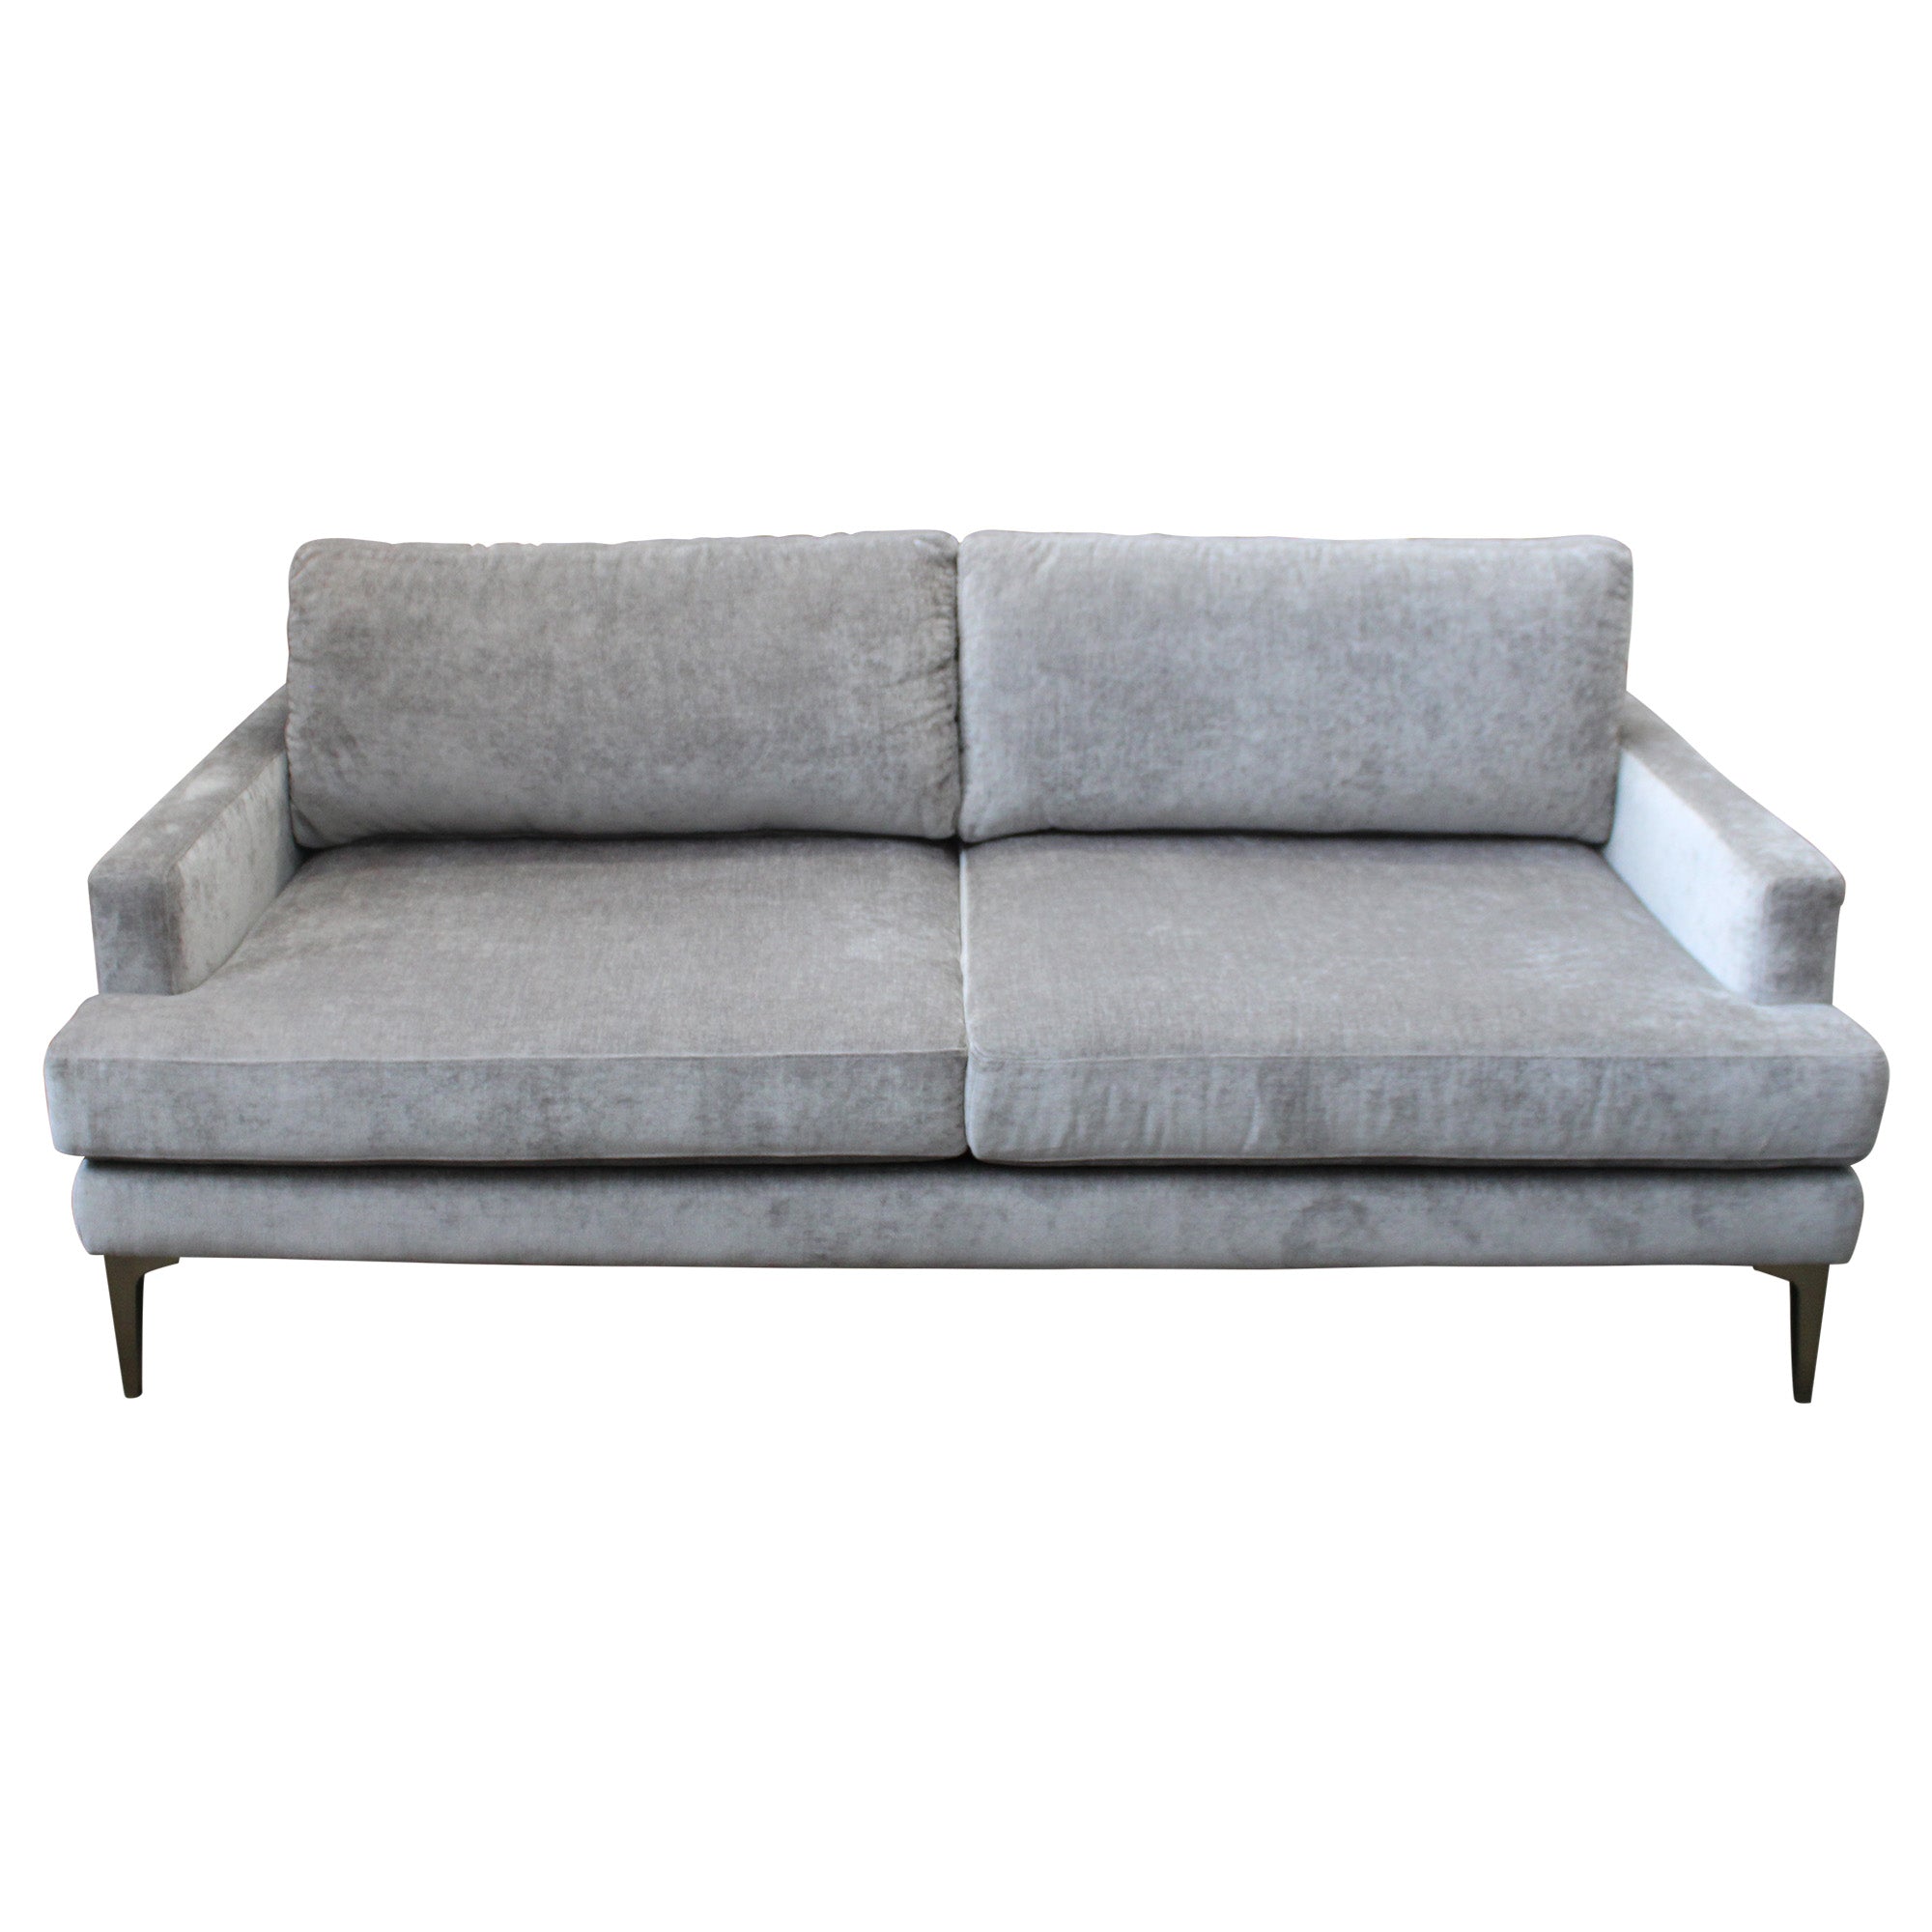 West Elm Andes Sofa, Grey Velvet - Preowned